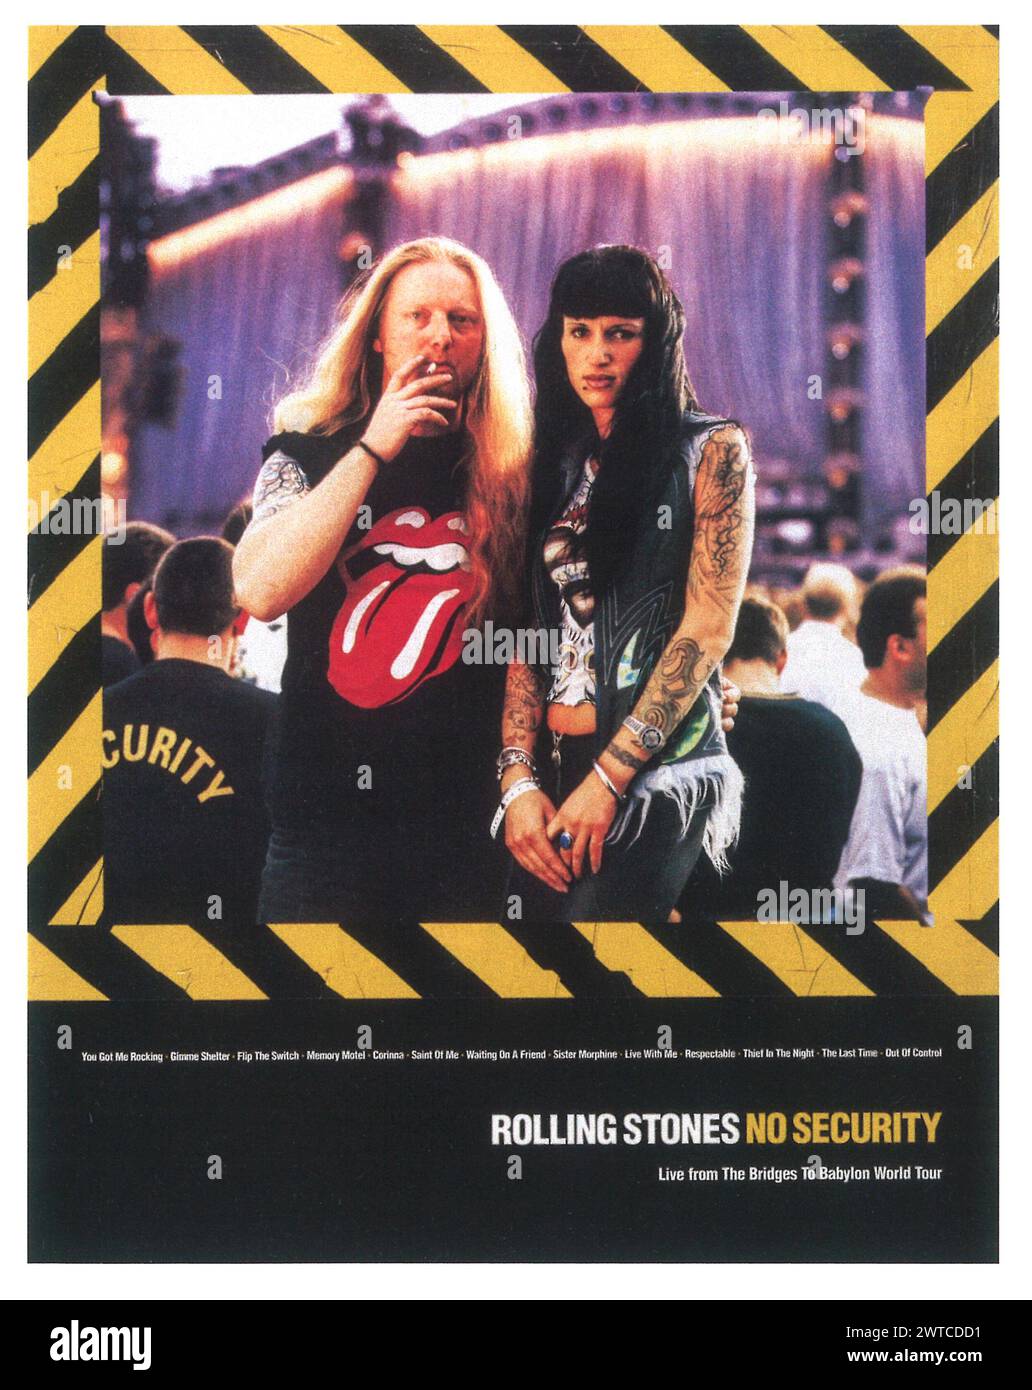 1998 Rolling Stones – No Security live from The Bridges to Babylon World Tour  album cover promo ad Stock Photo